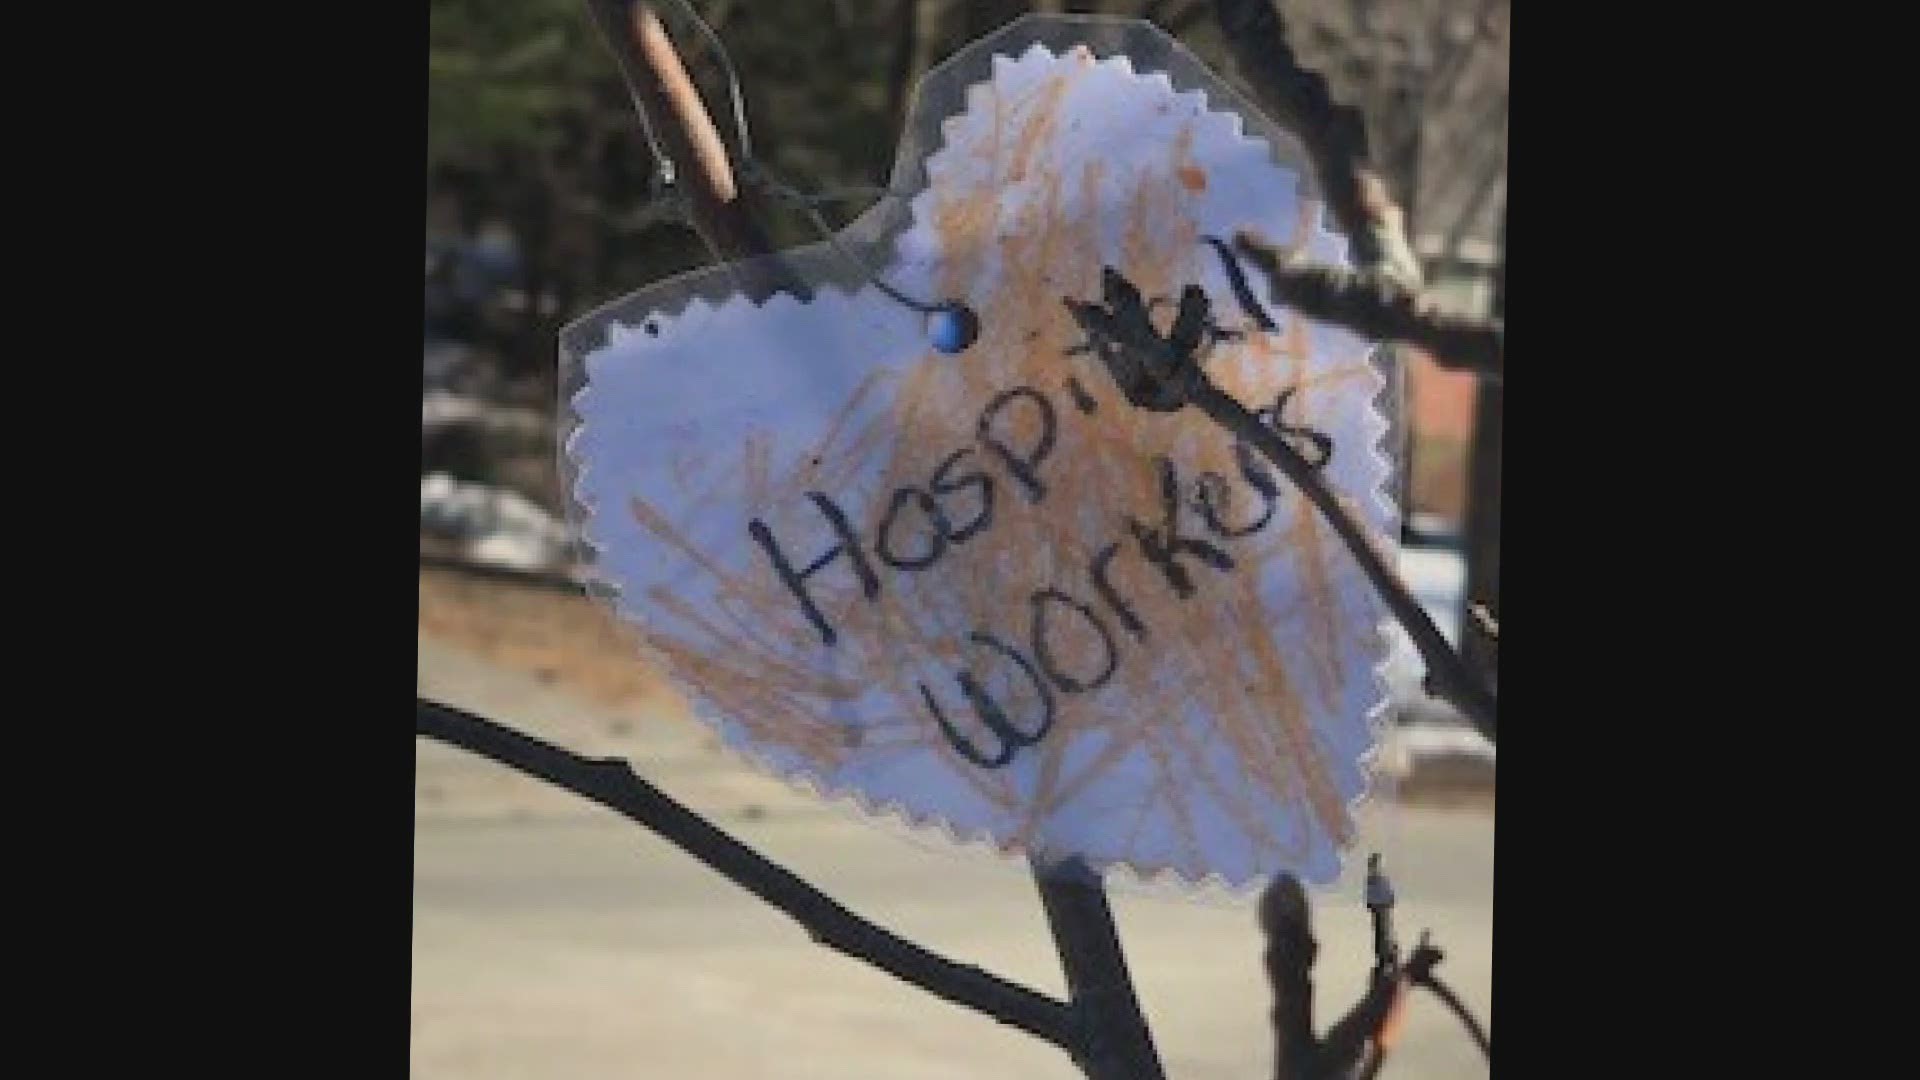 A daycare owner in Waterville has a tree full of hearts thanks to the kids who she cares for.